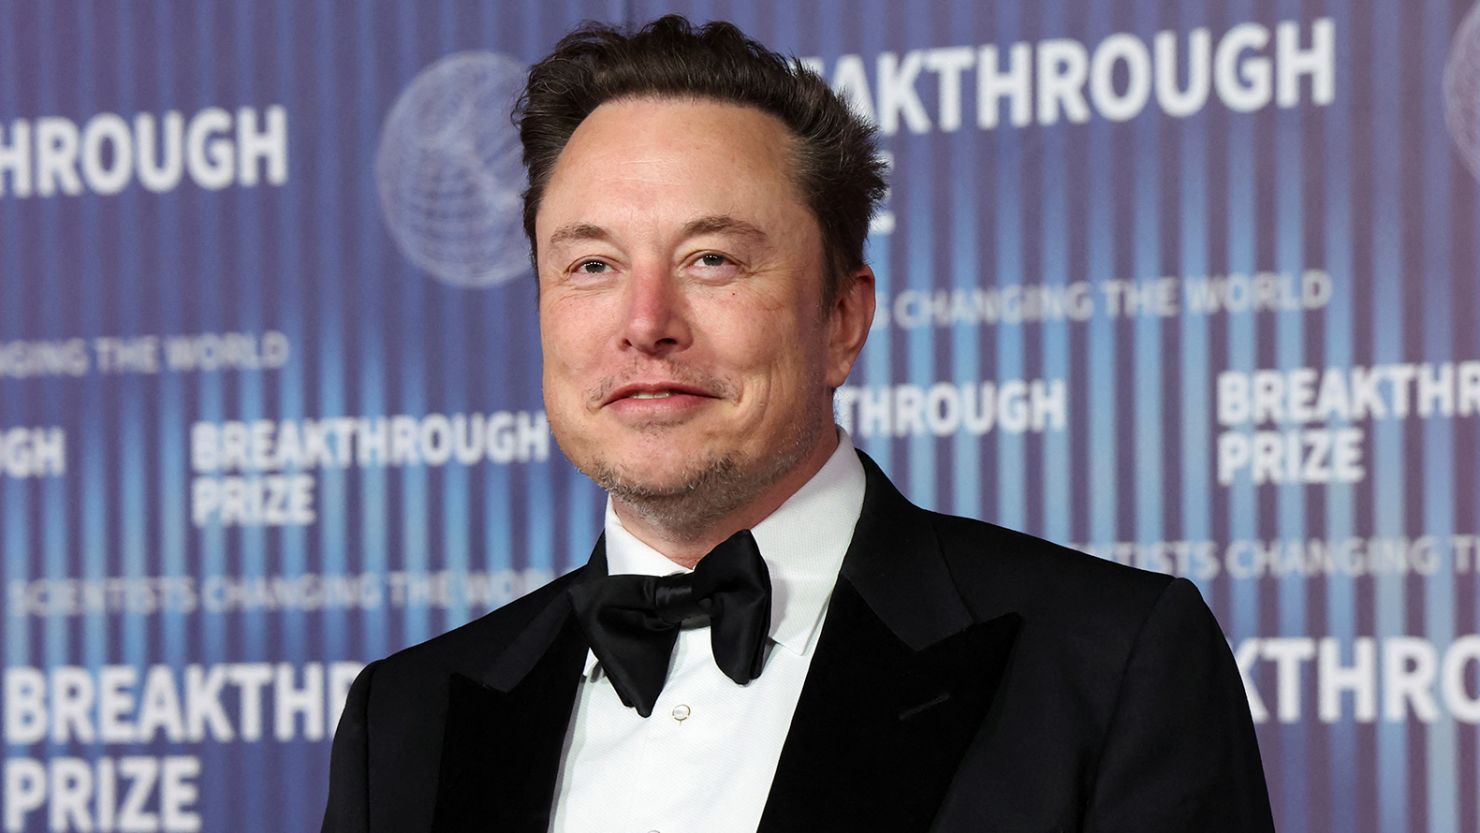 Elon Musk's visit to India suddenly postponed - Union Govt forced to set up plant in Gujarat